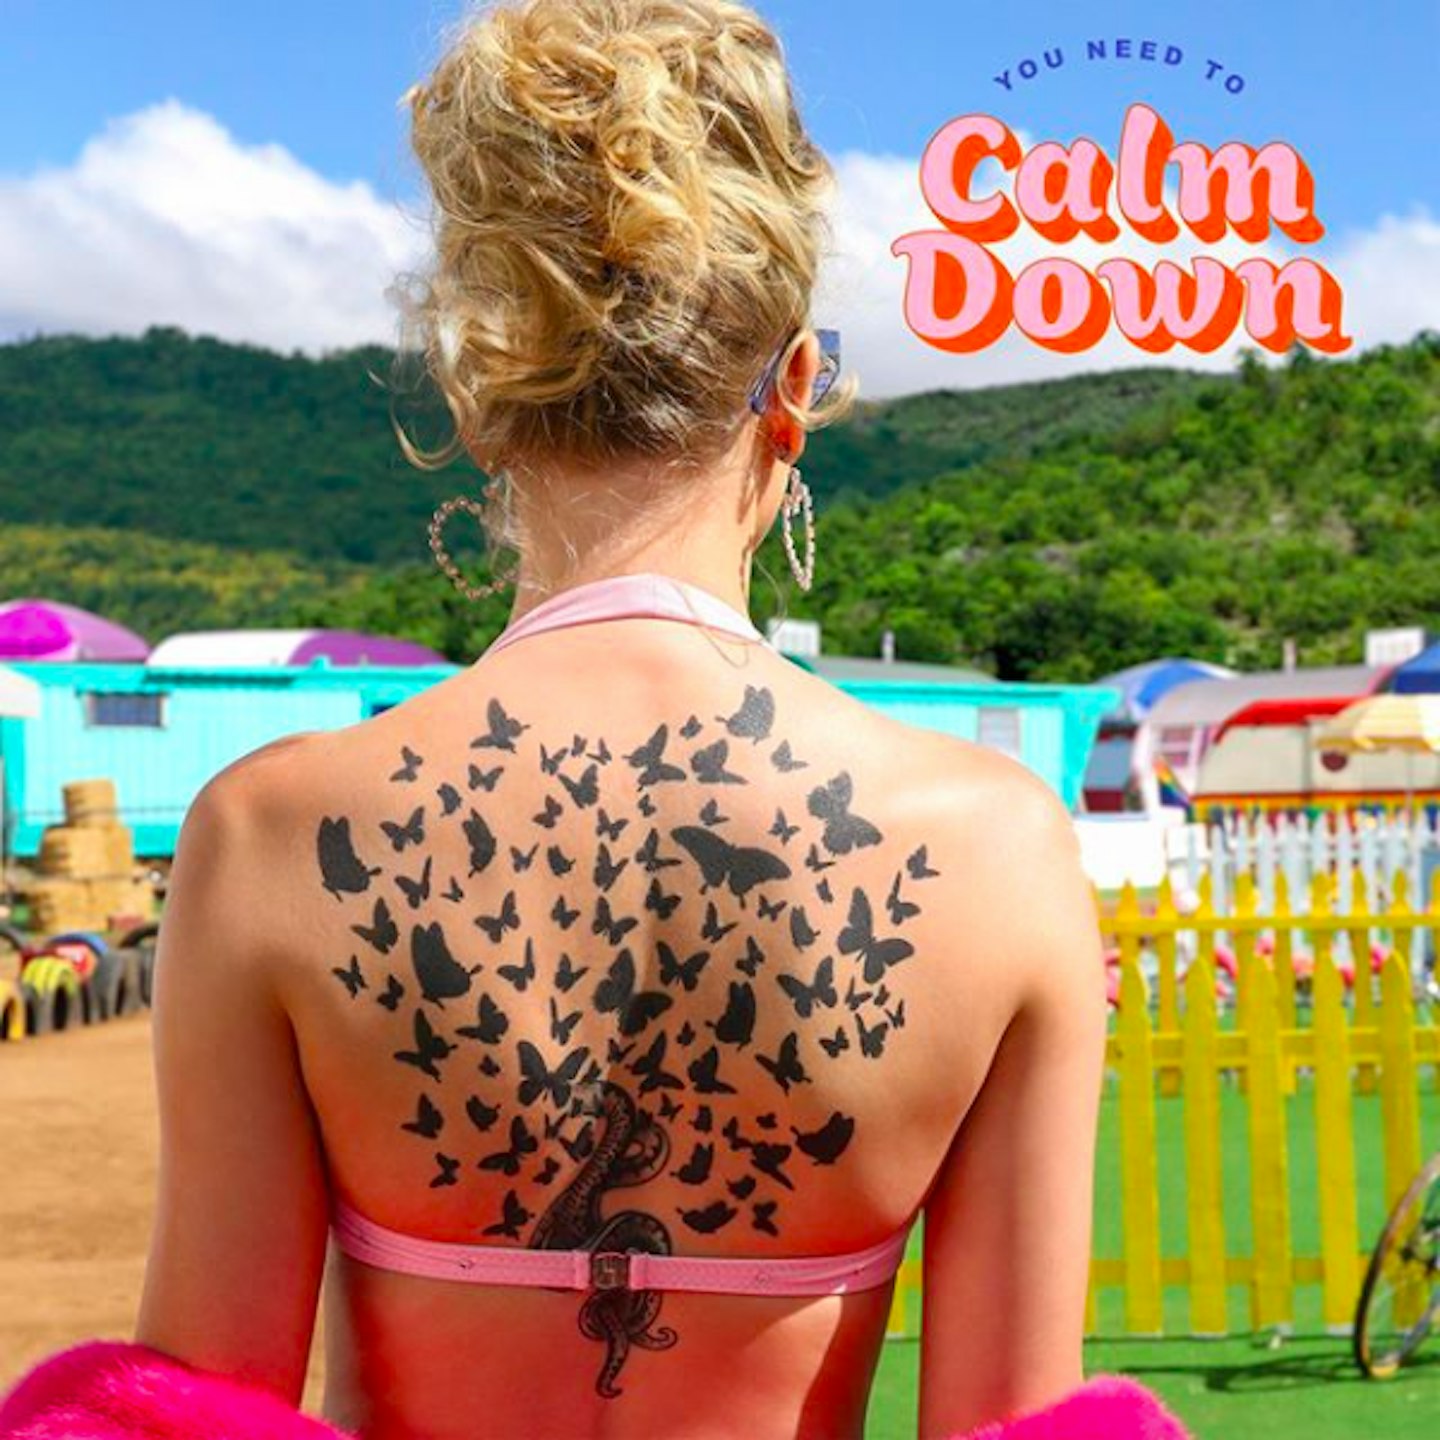 Taylor Swift Releases New Single, 'You Need To Calm Down'.